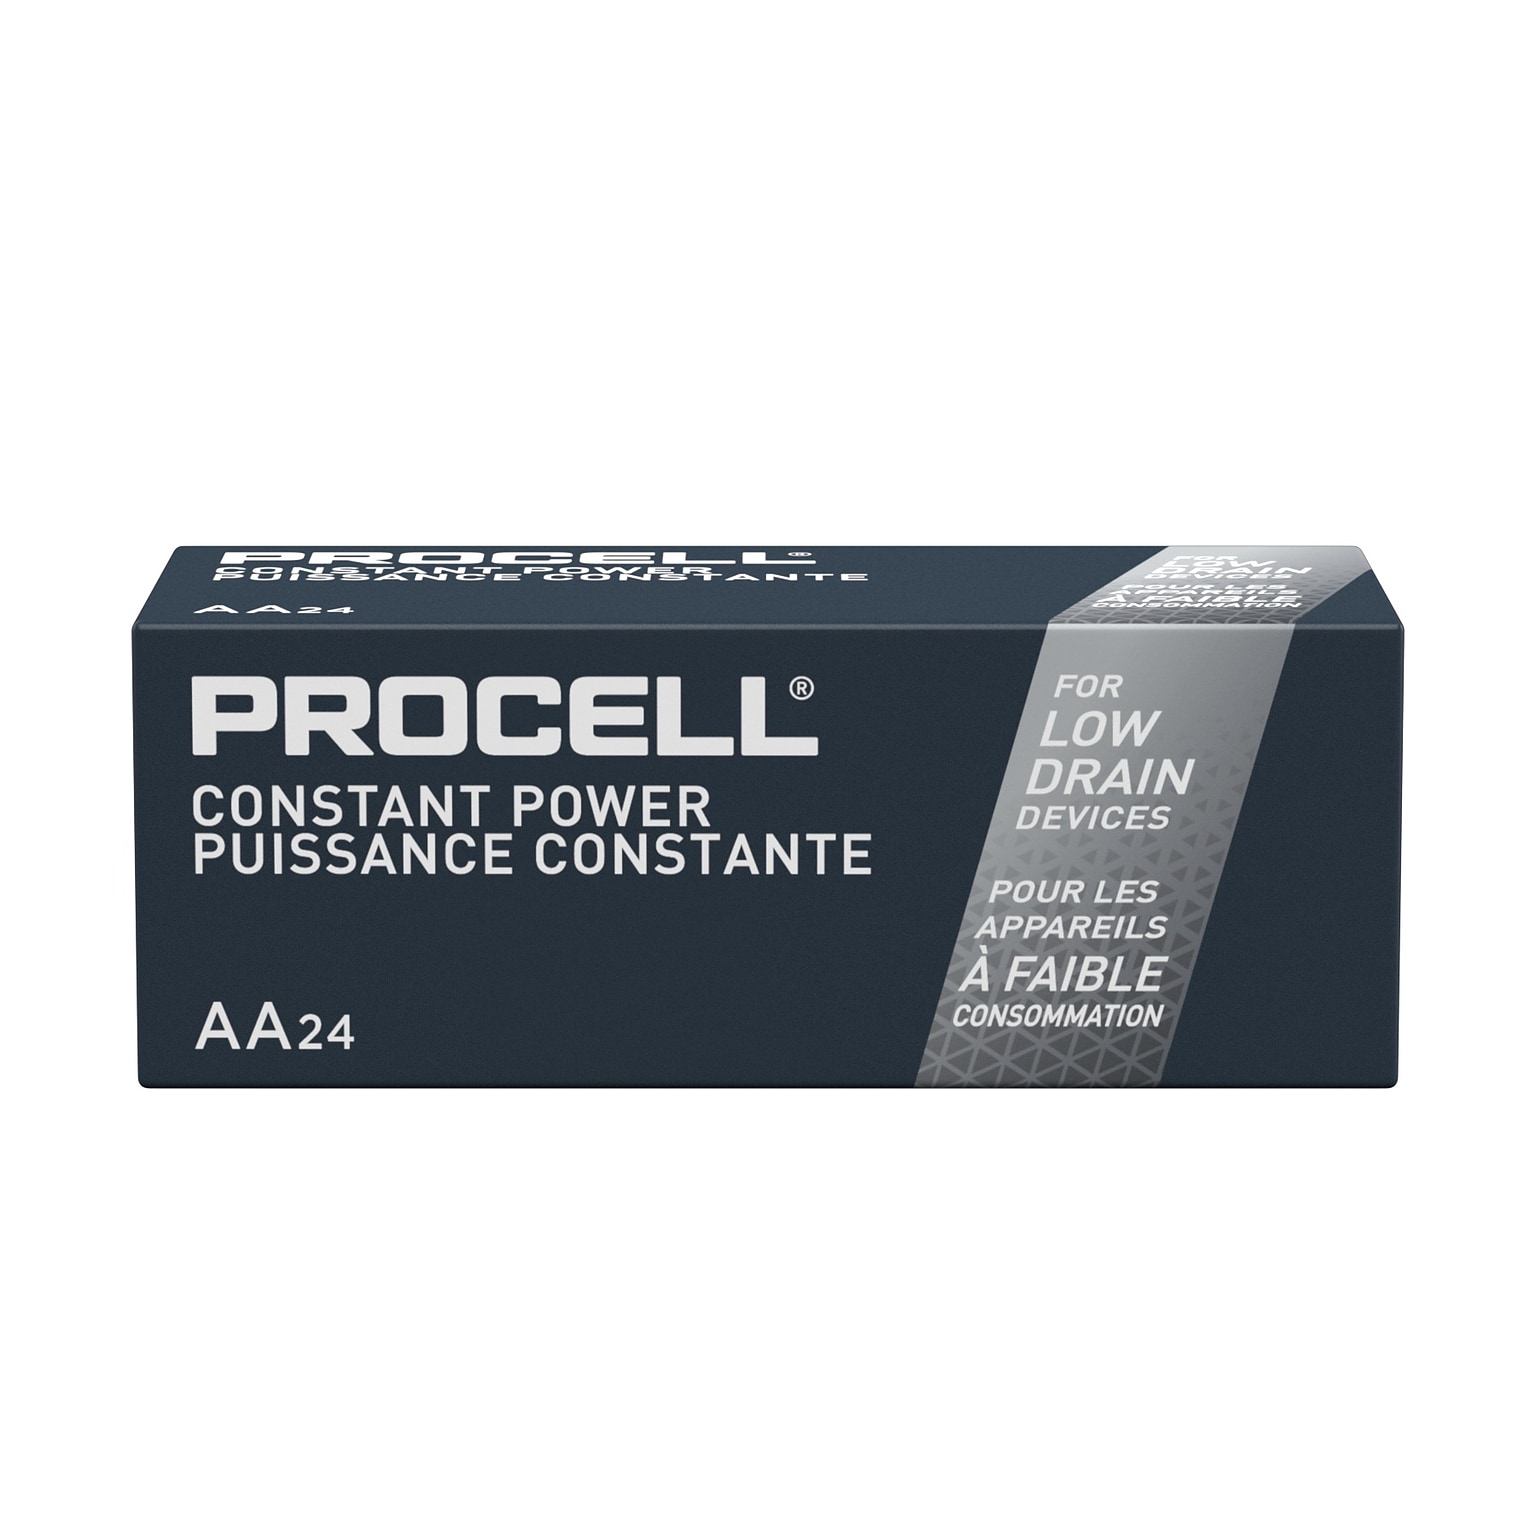 Duracell PROCELL AA Alkaline Battery, 144/Pack (PC1500)